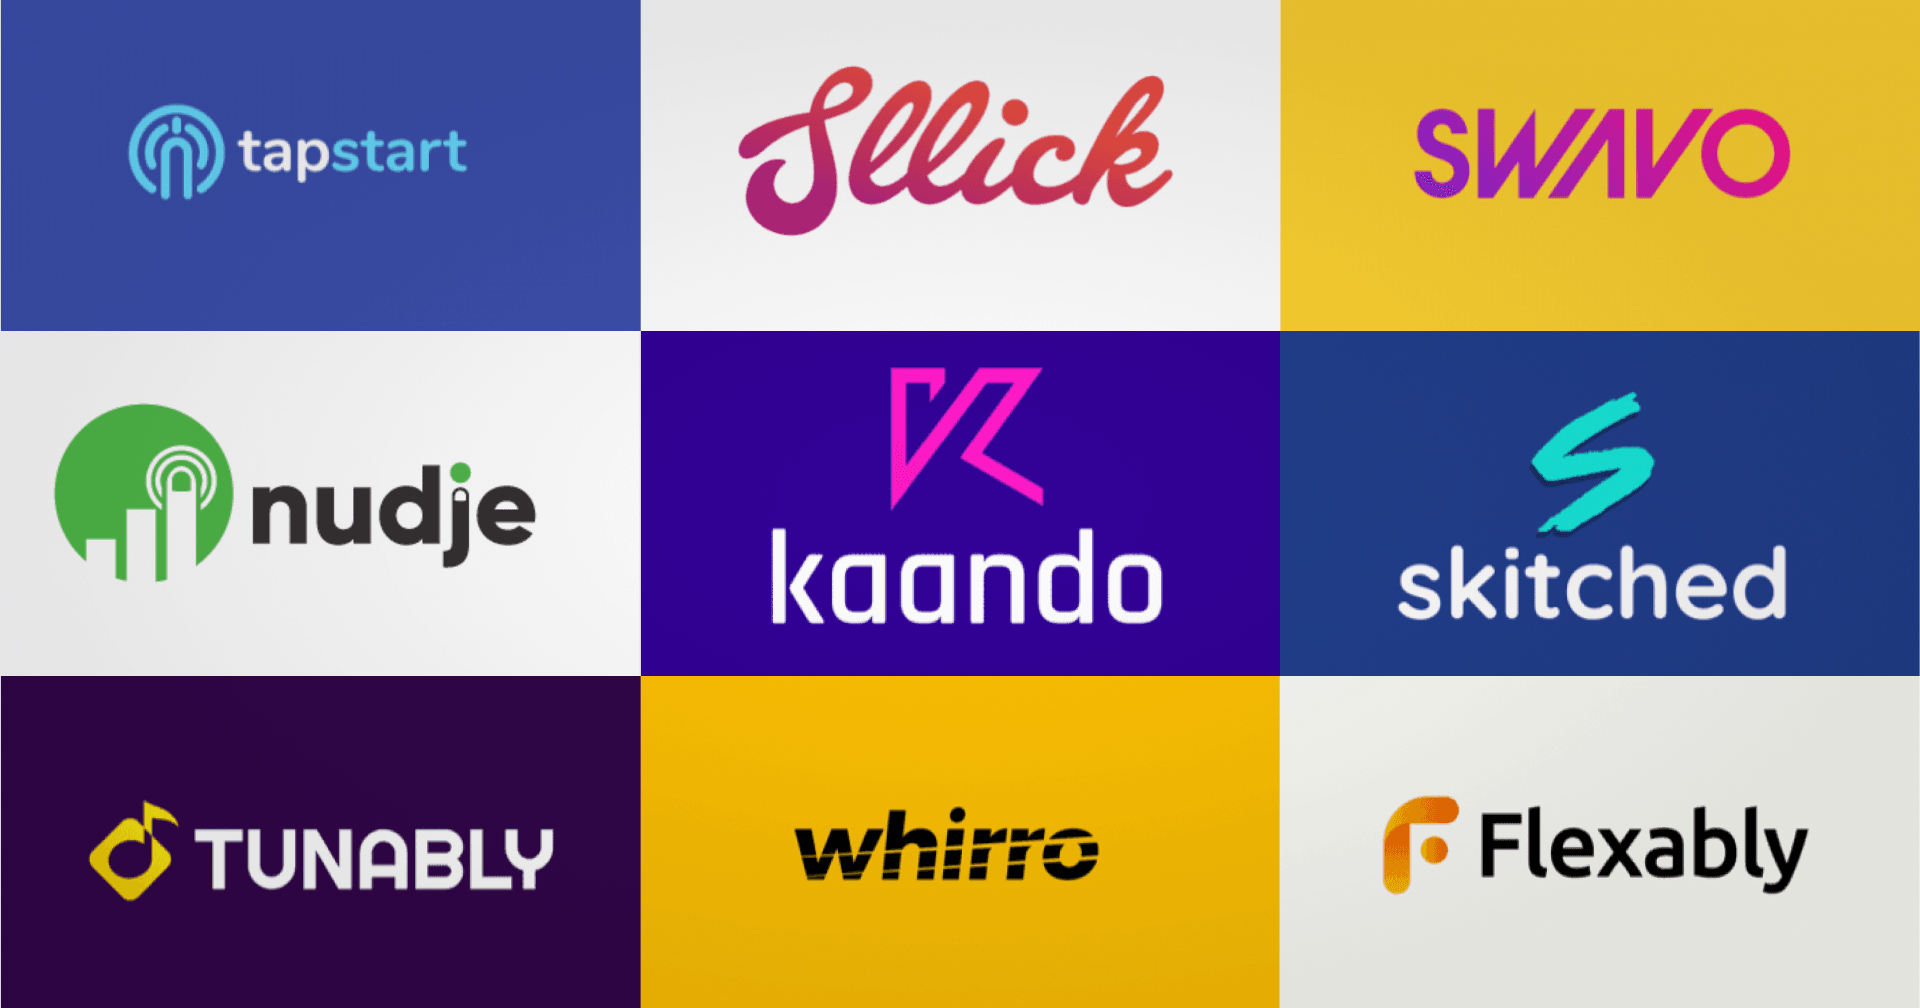 How to pick a good startup name